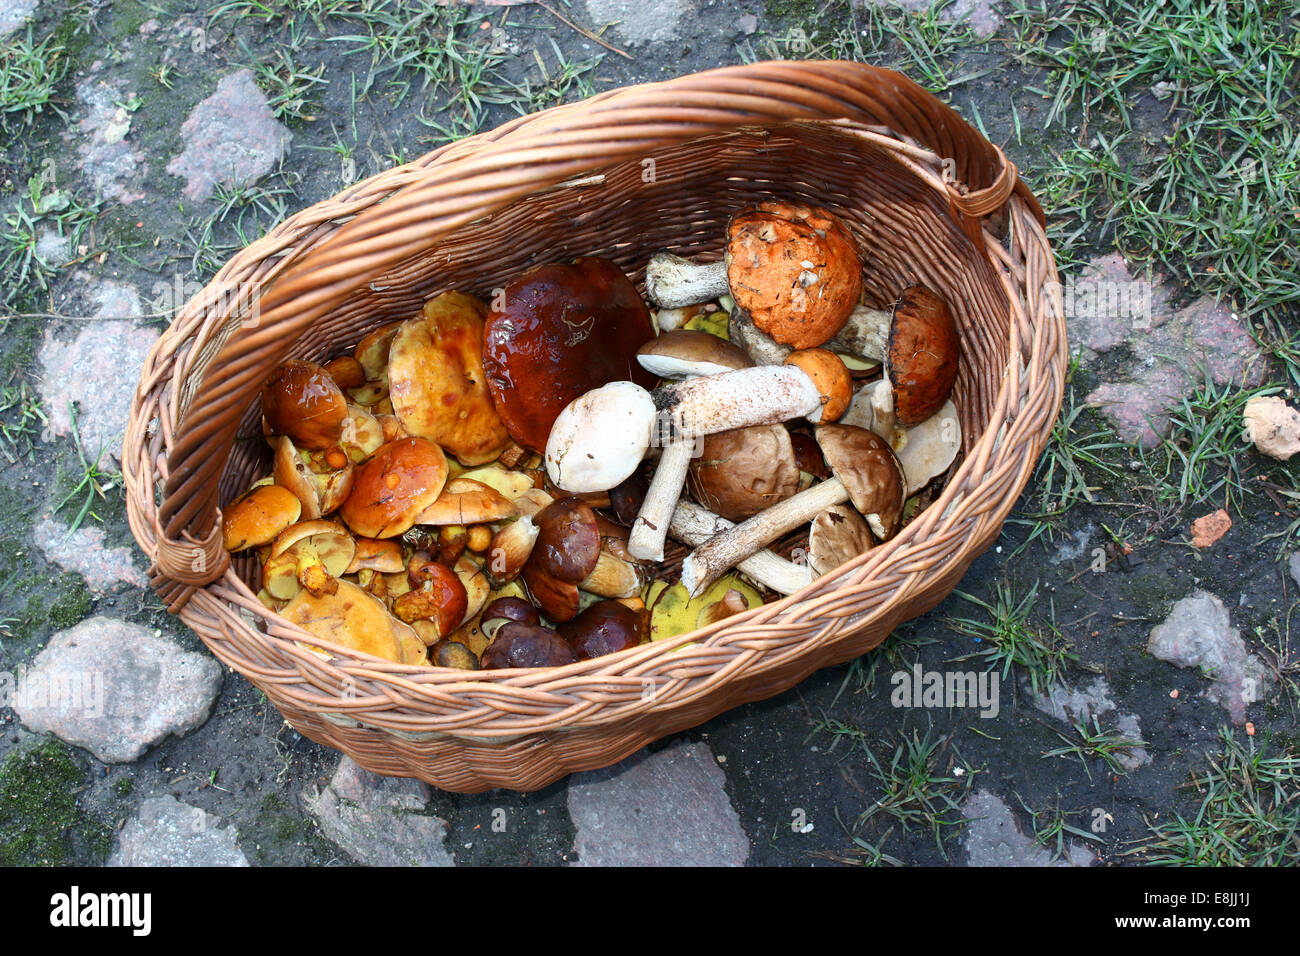 Basket of fresh edible mushrooms from the forest Stock Photo